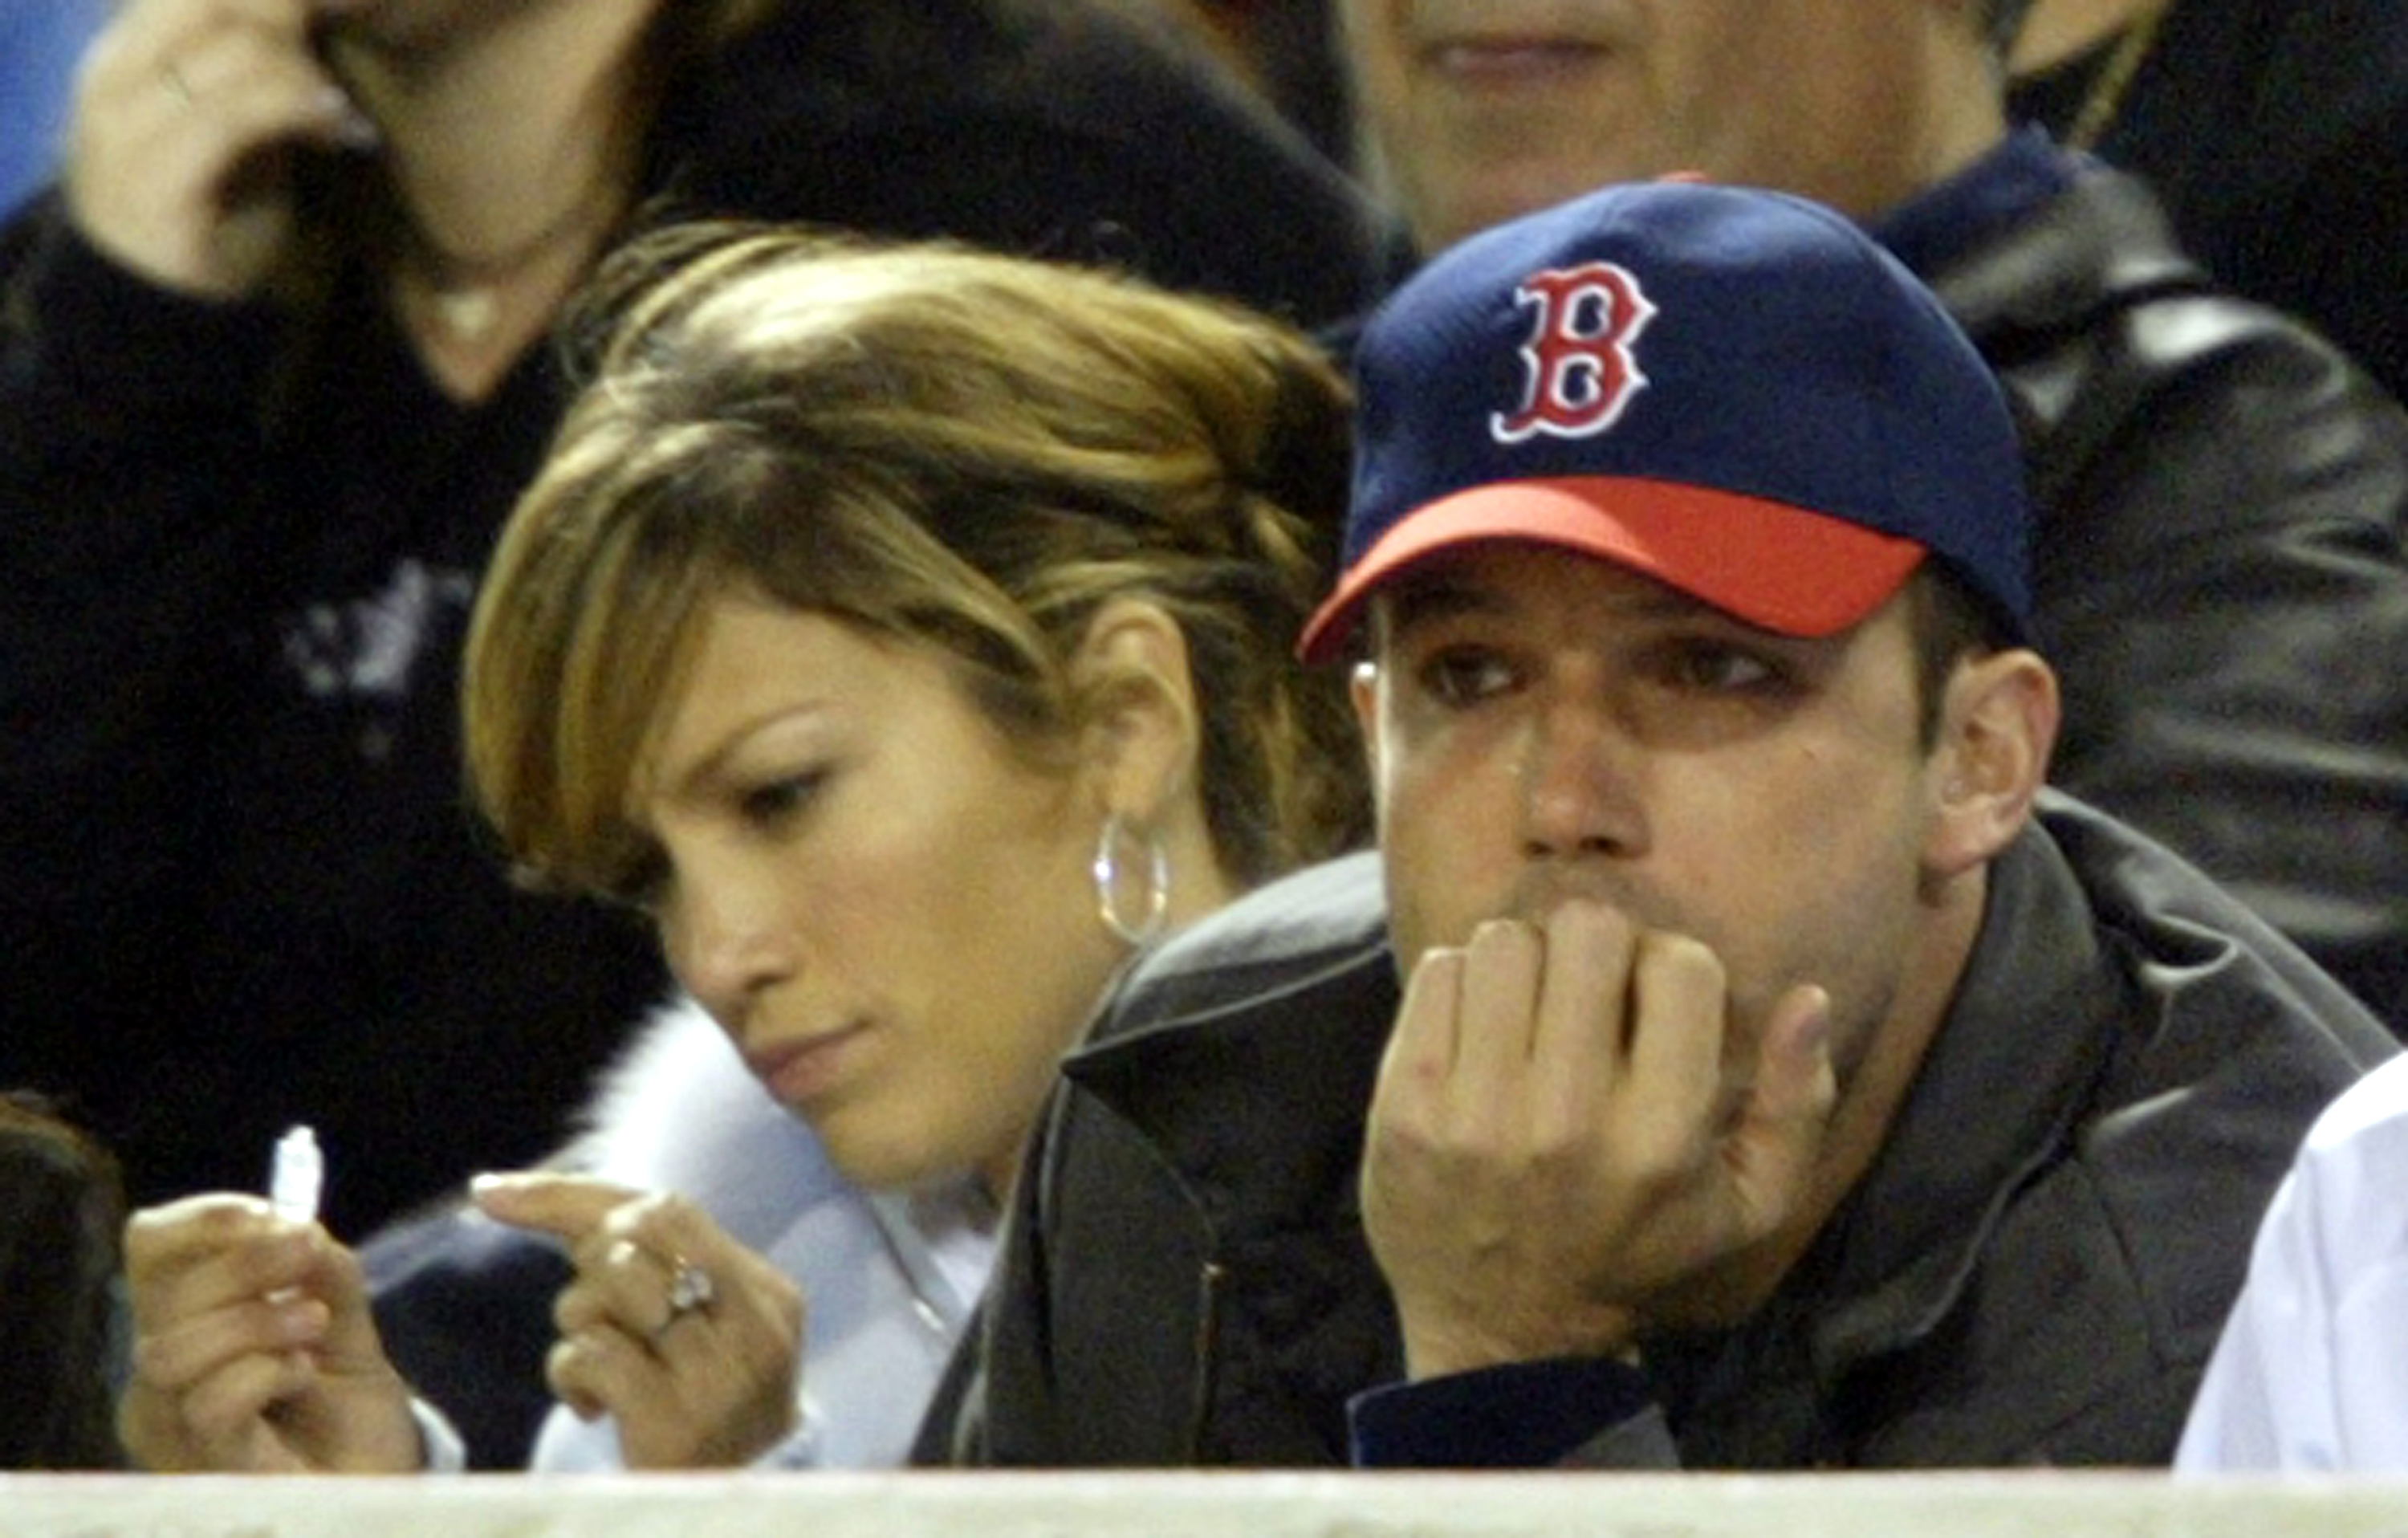 Jennifer Lopez and Ben Affleck during a baseball game on April 27, 2003 in Anaheim California. | Source: Getty Images